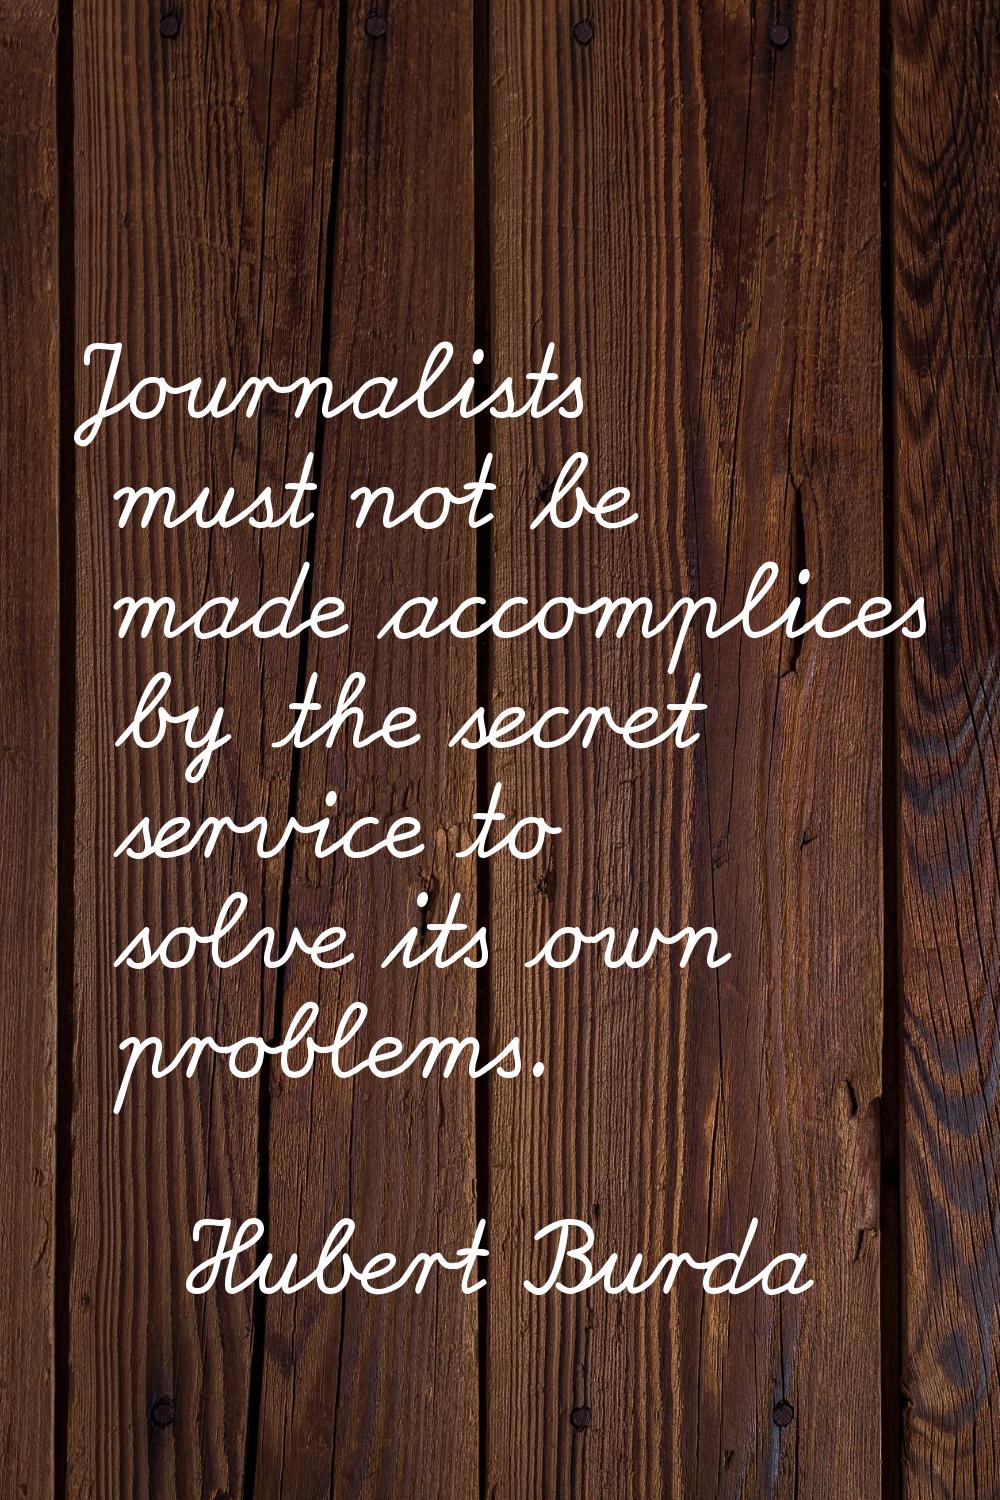 Journalists must not be made accomplices by the secret service to solve its own problems.